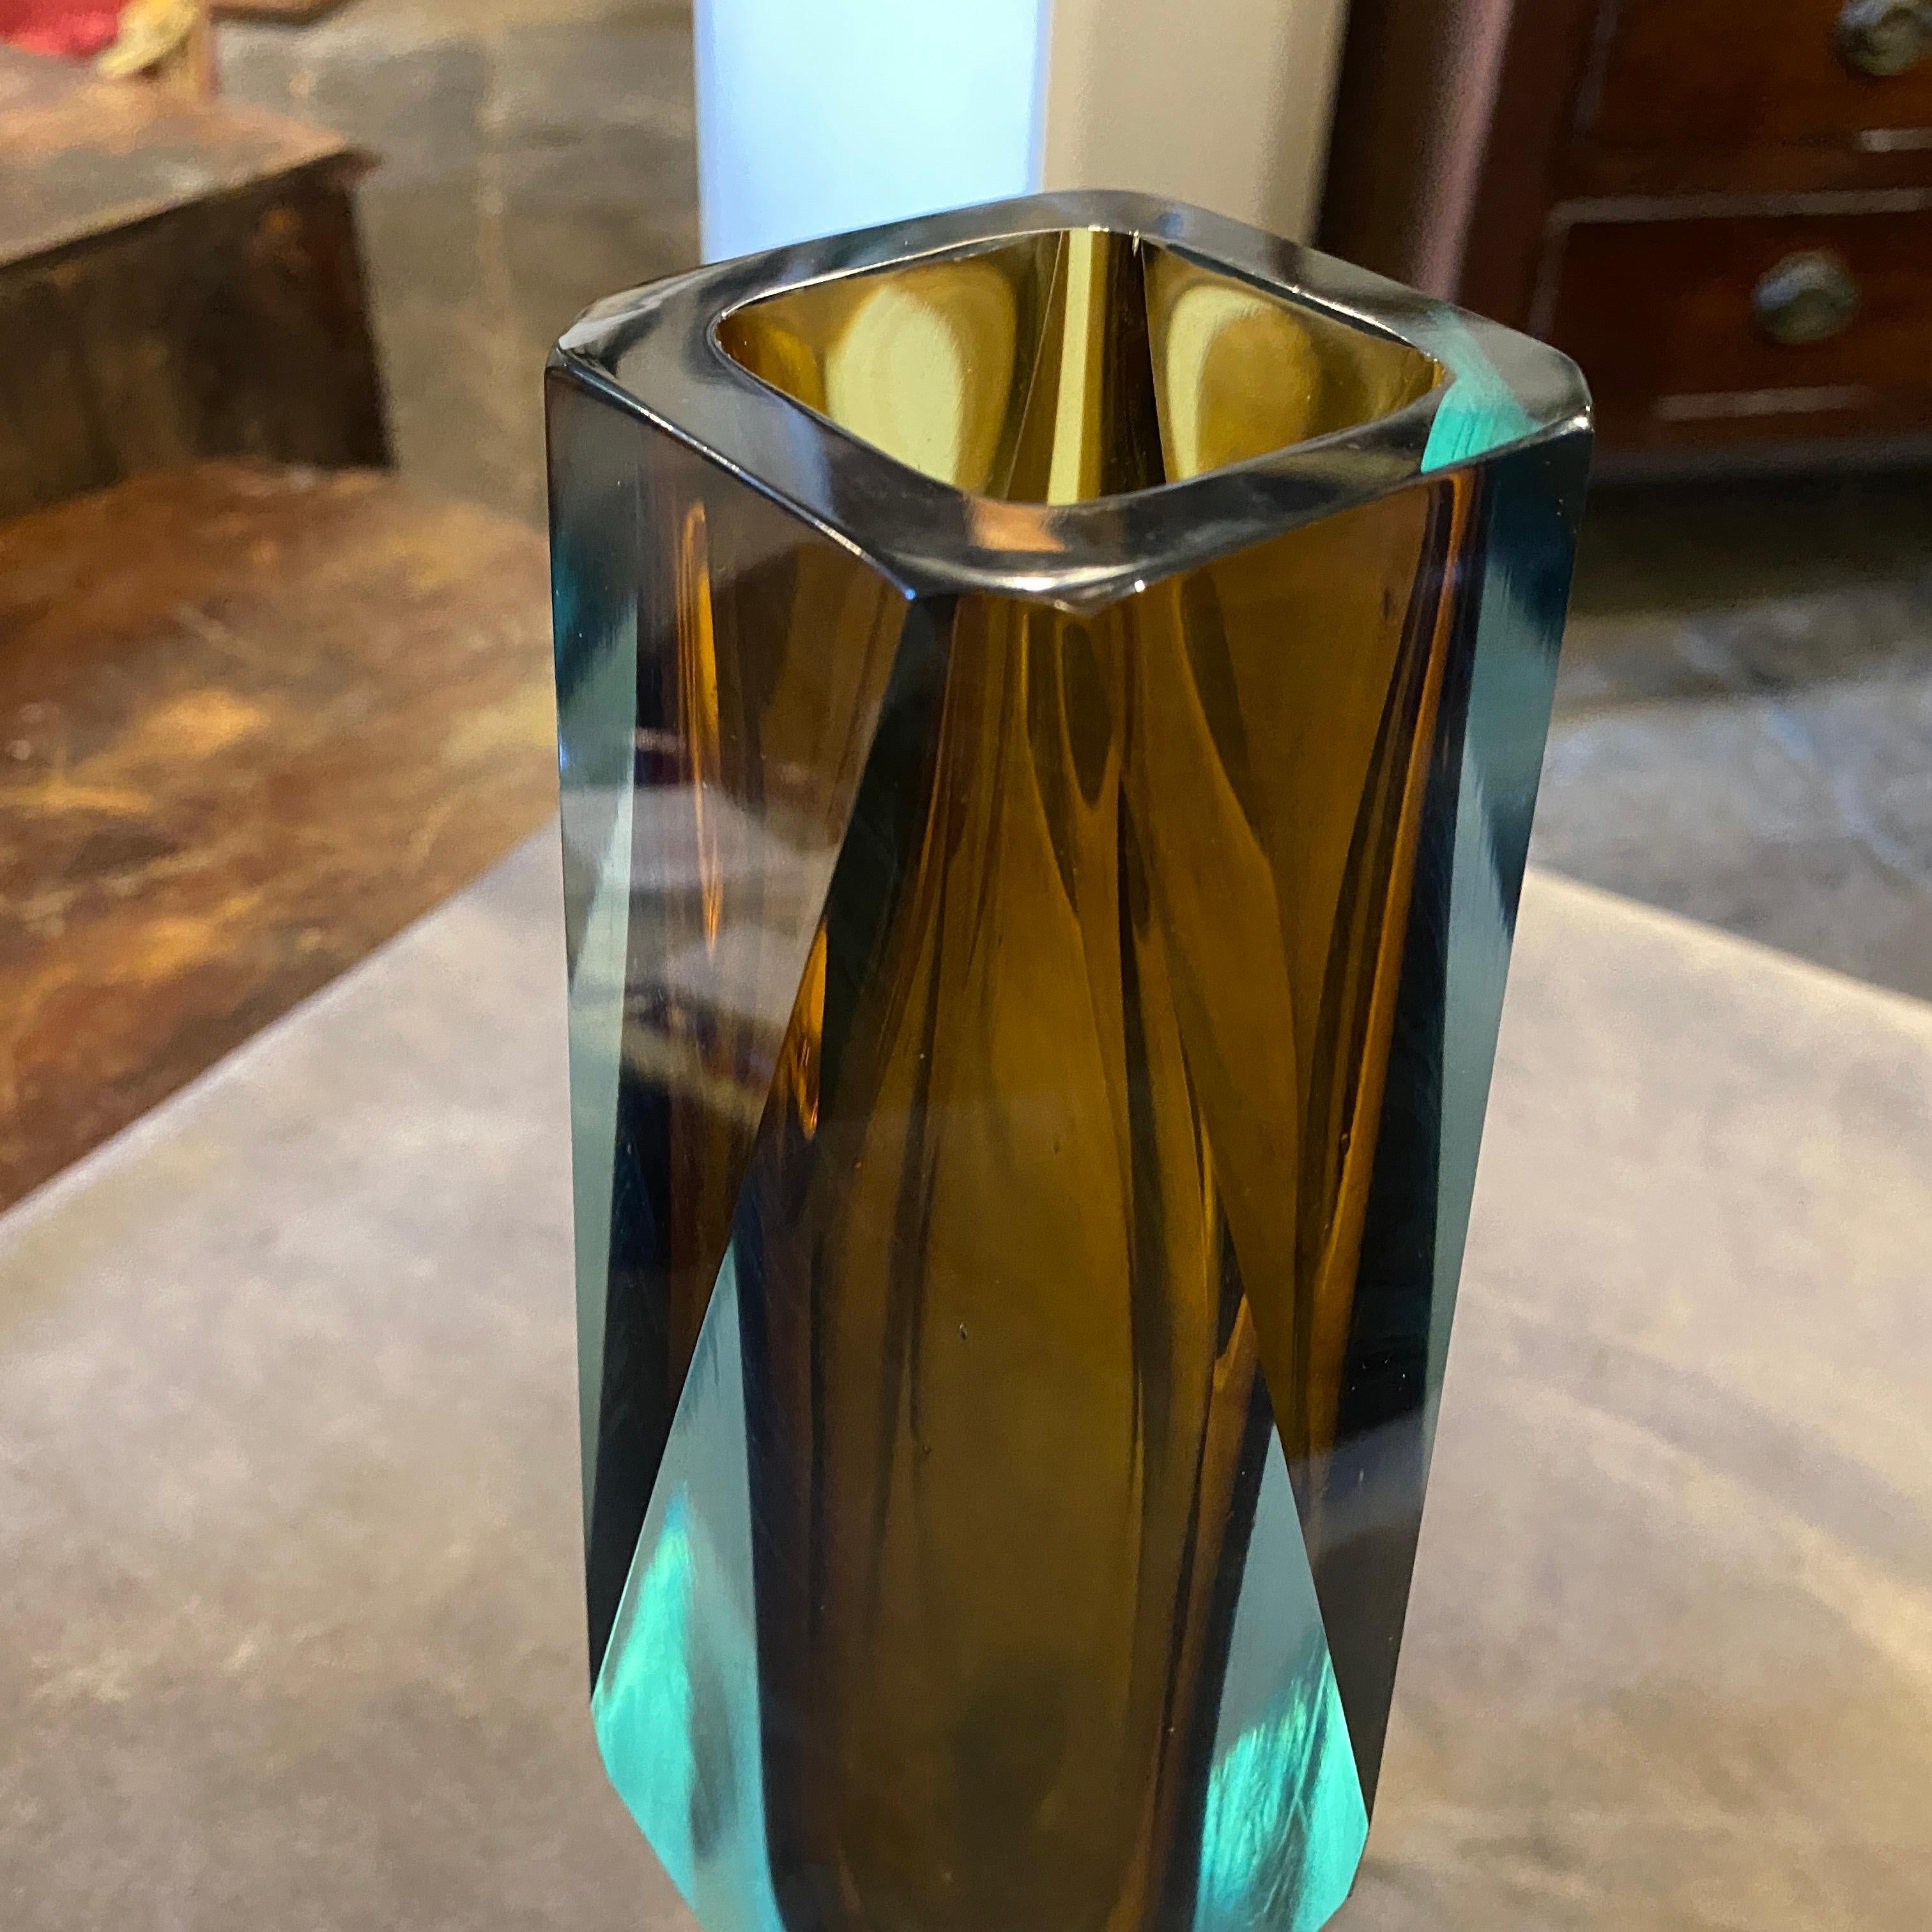 A Murano glass vase made by Seguso in the 1970s in perfect conditions.